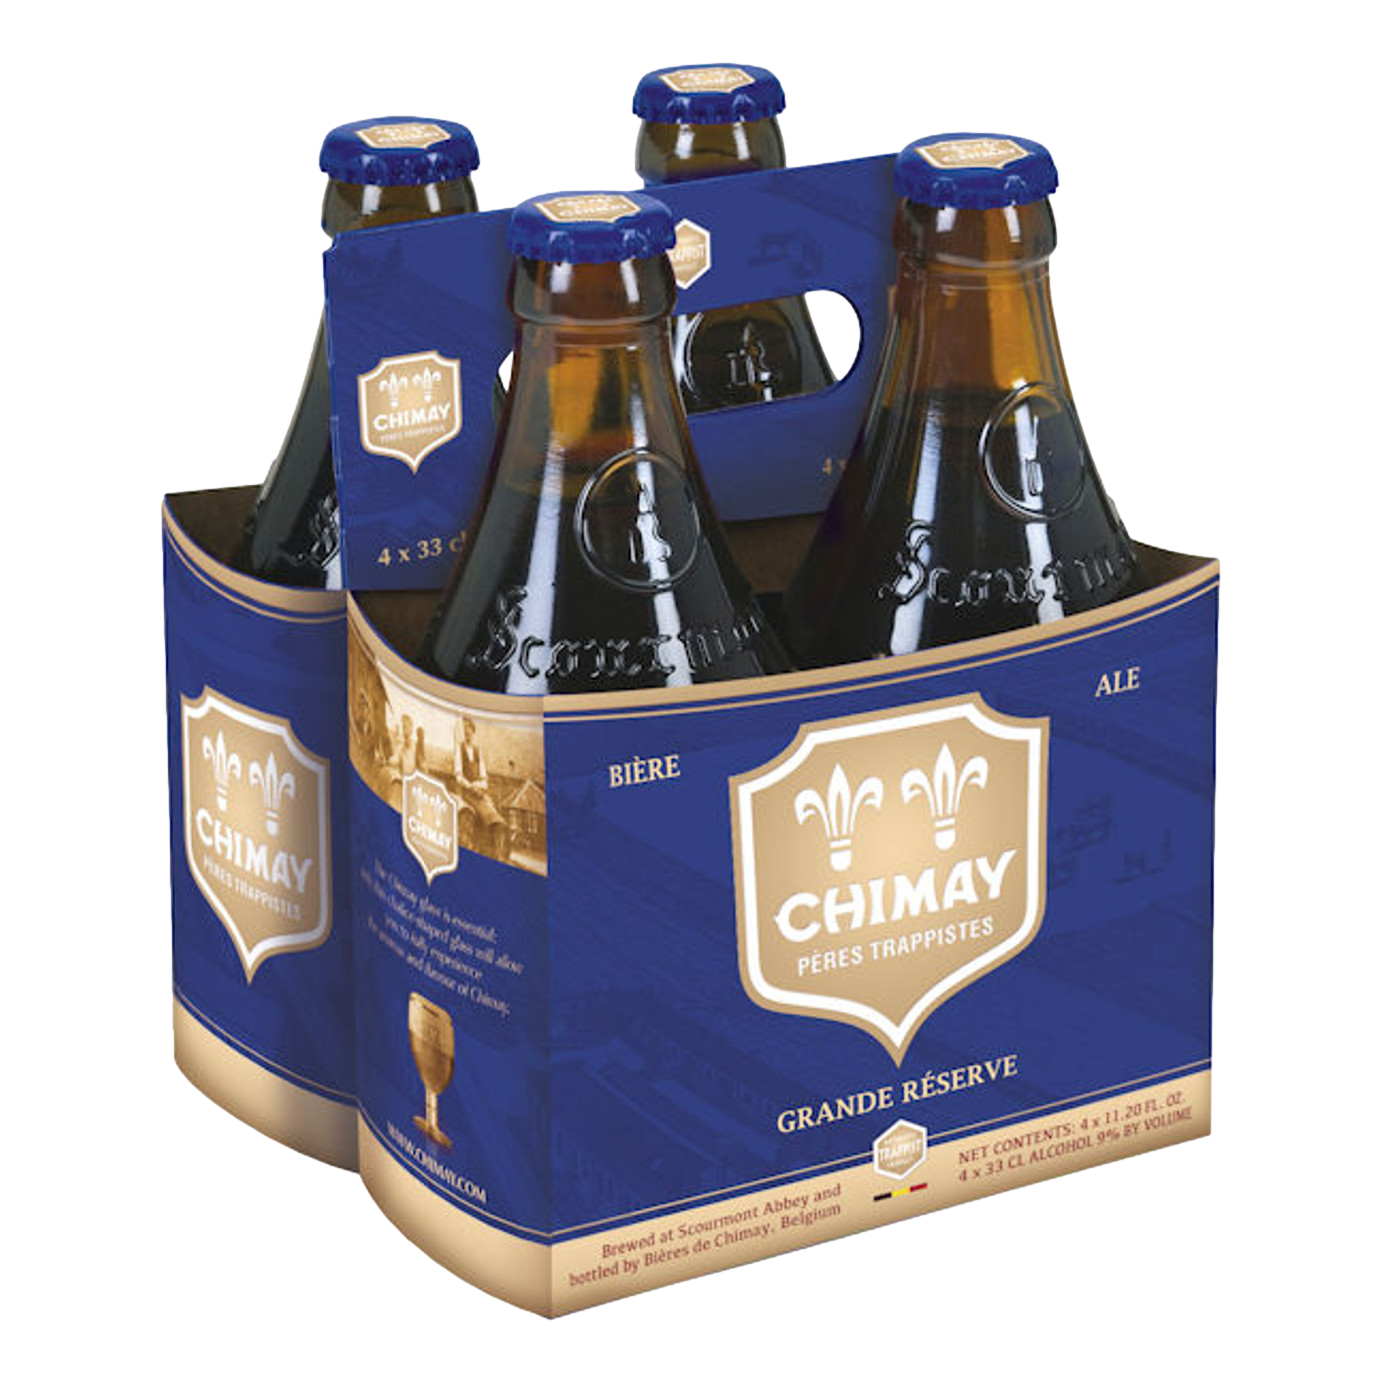 Chimay Blue Trappist Ale 330ml Bottle 4 Pack